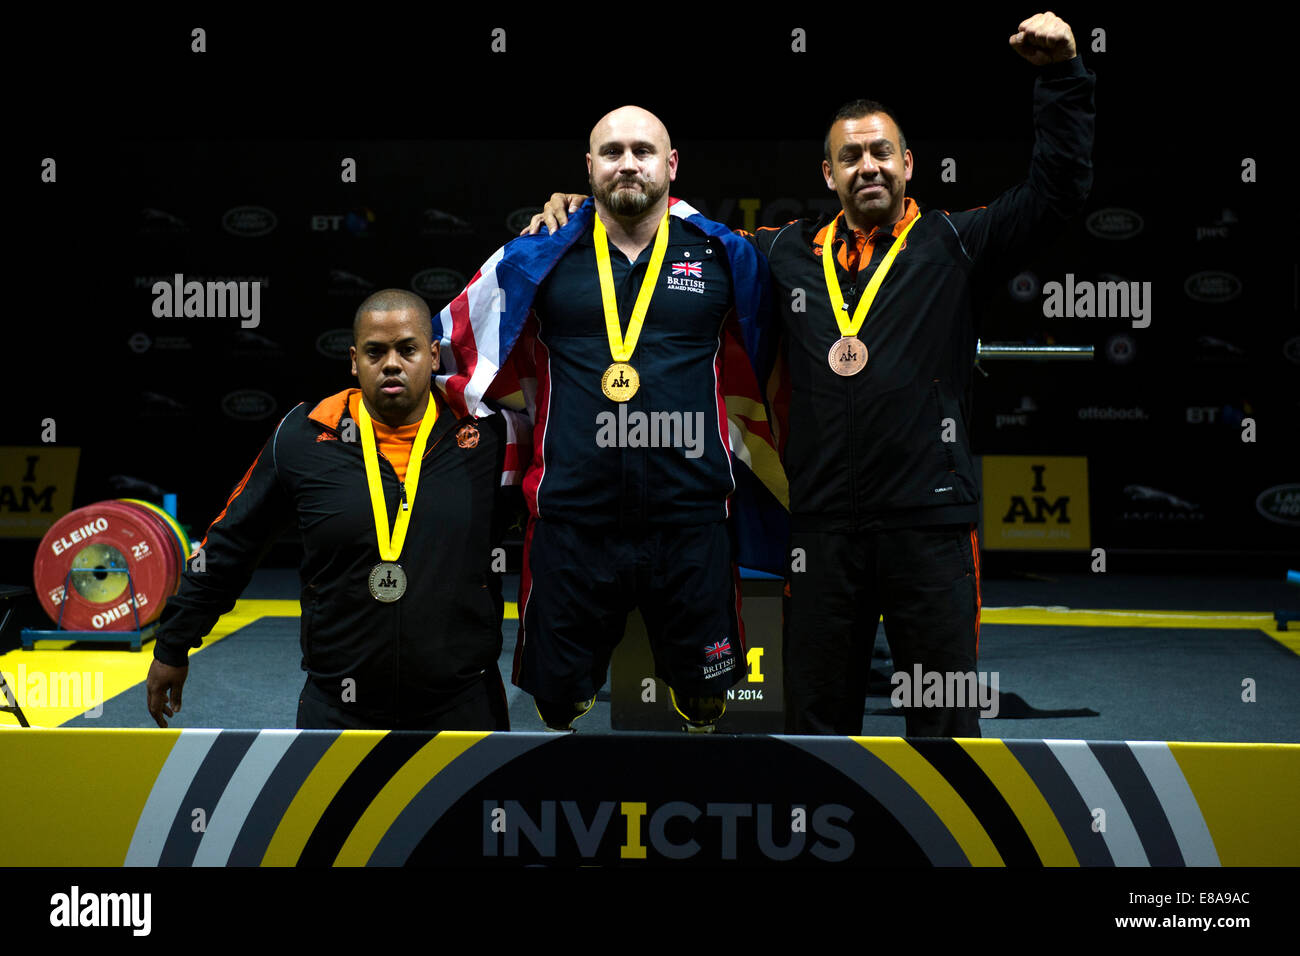 James Wilson, a gold medal winner representing the British Army; Toninho Norden, a silver medal winner representing the Netherla Stock Photo